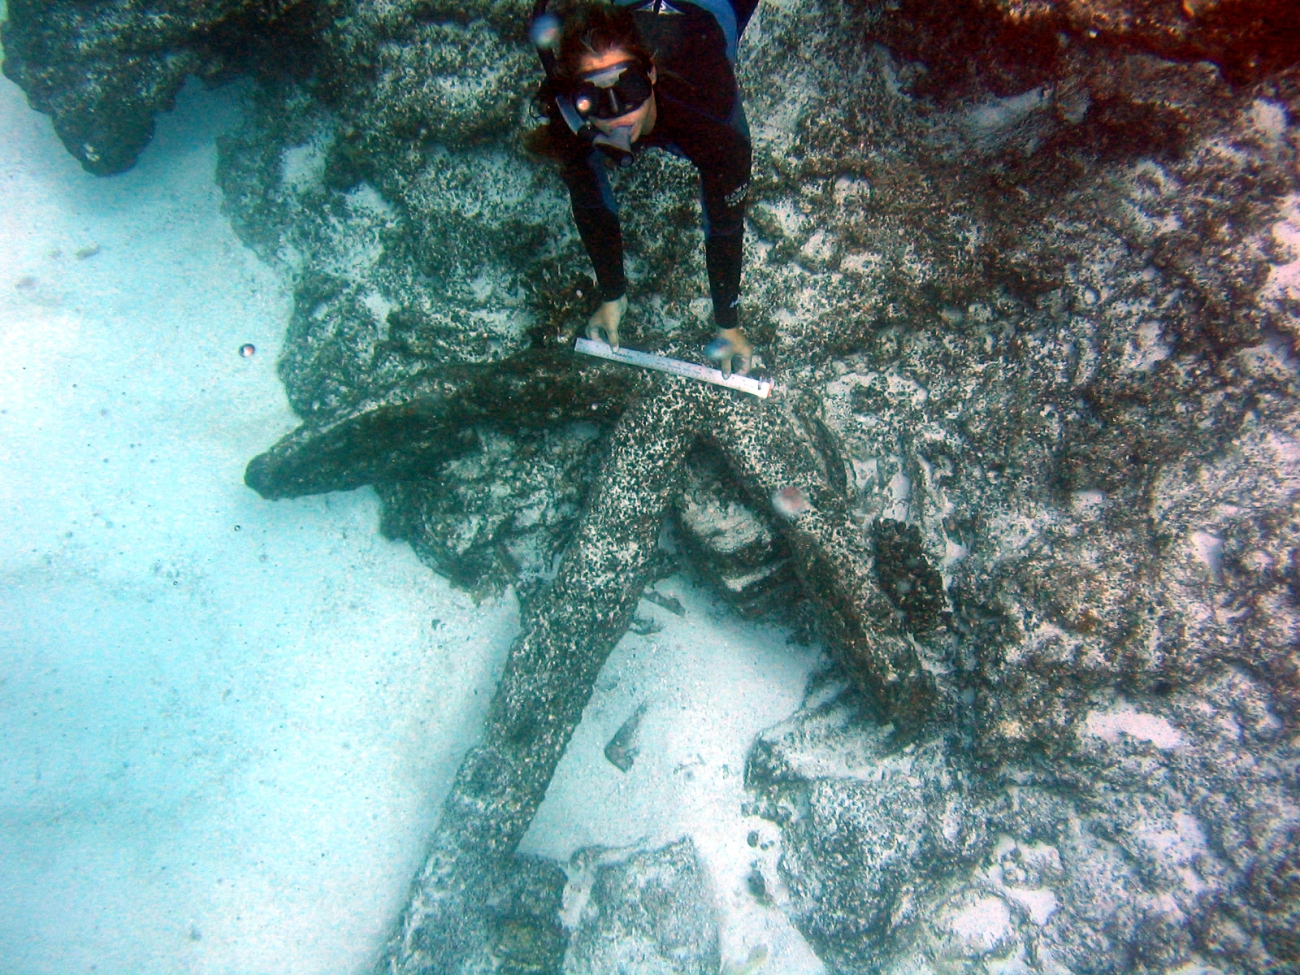 Diver shows scale of anchors seen in image reef3696